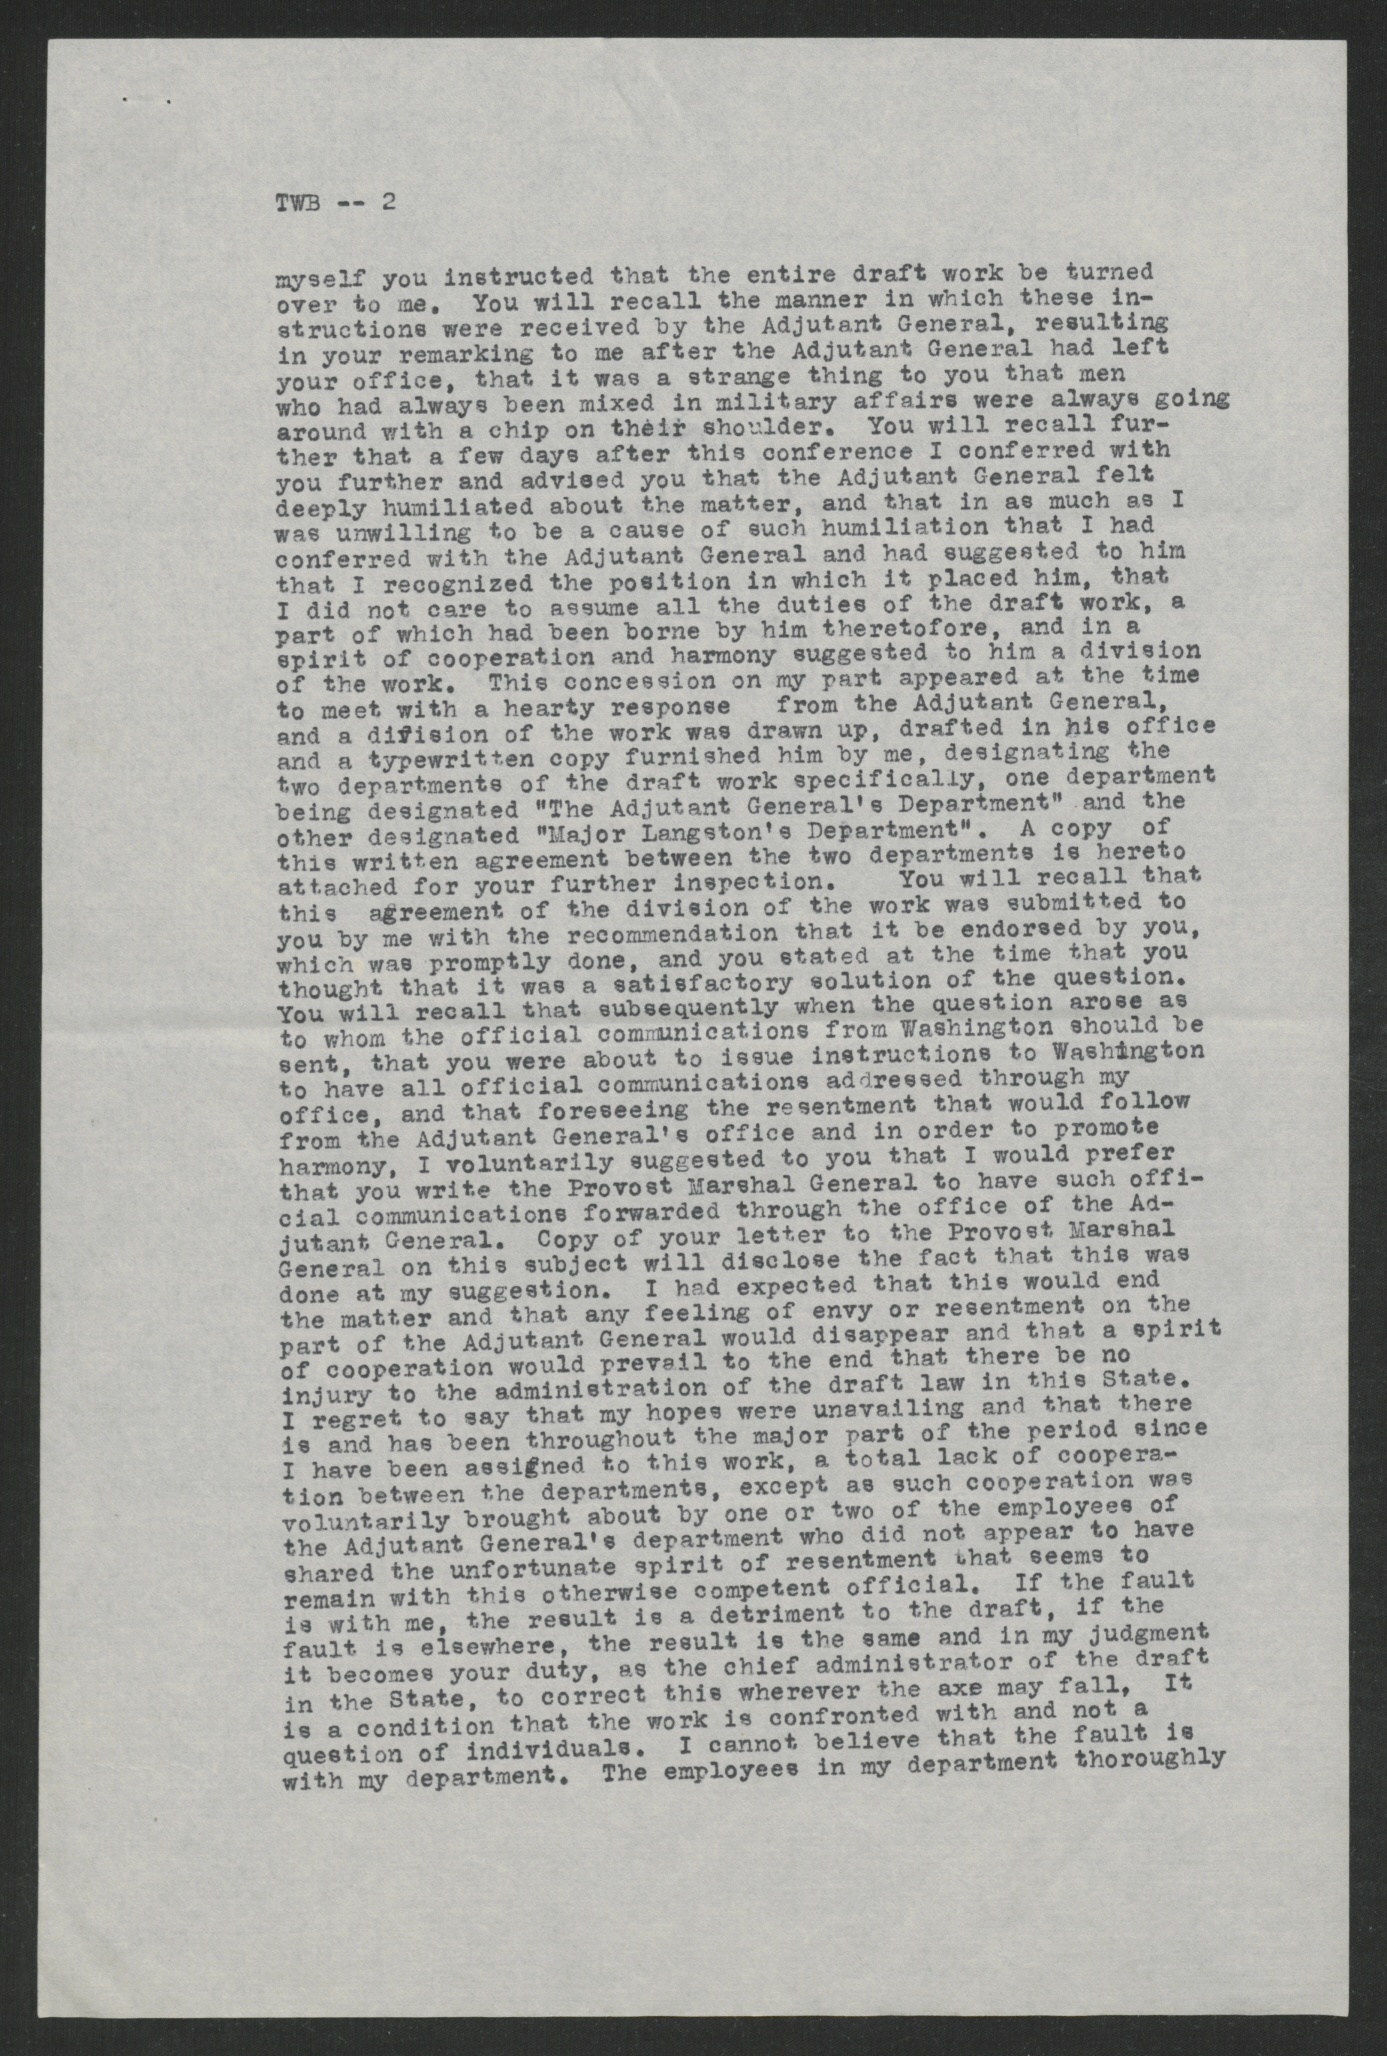 Langston to Bickett, May 17, 1918, page 2